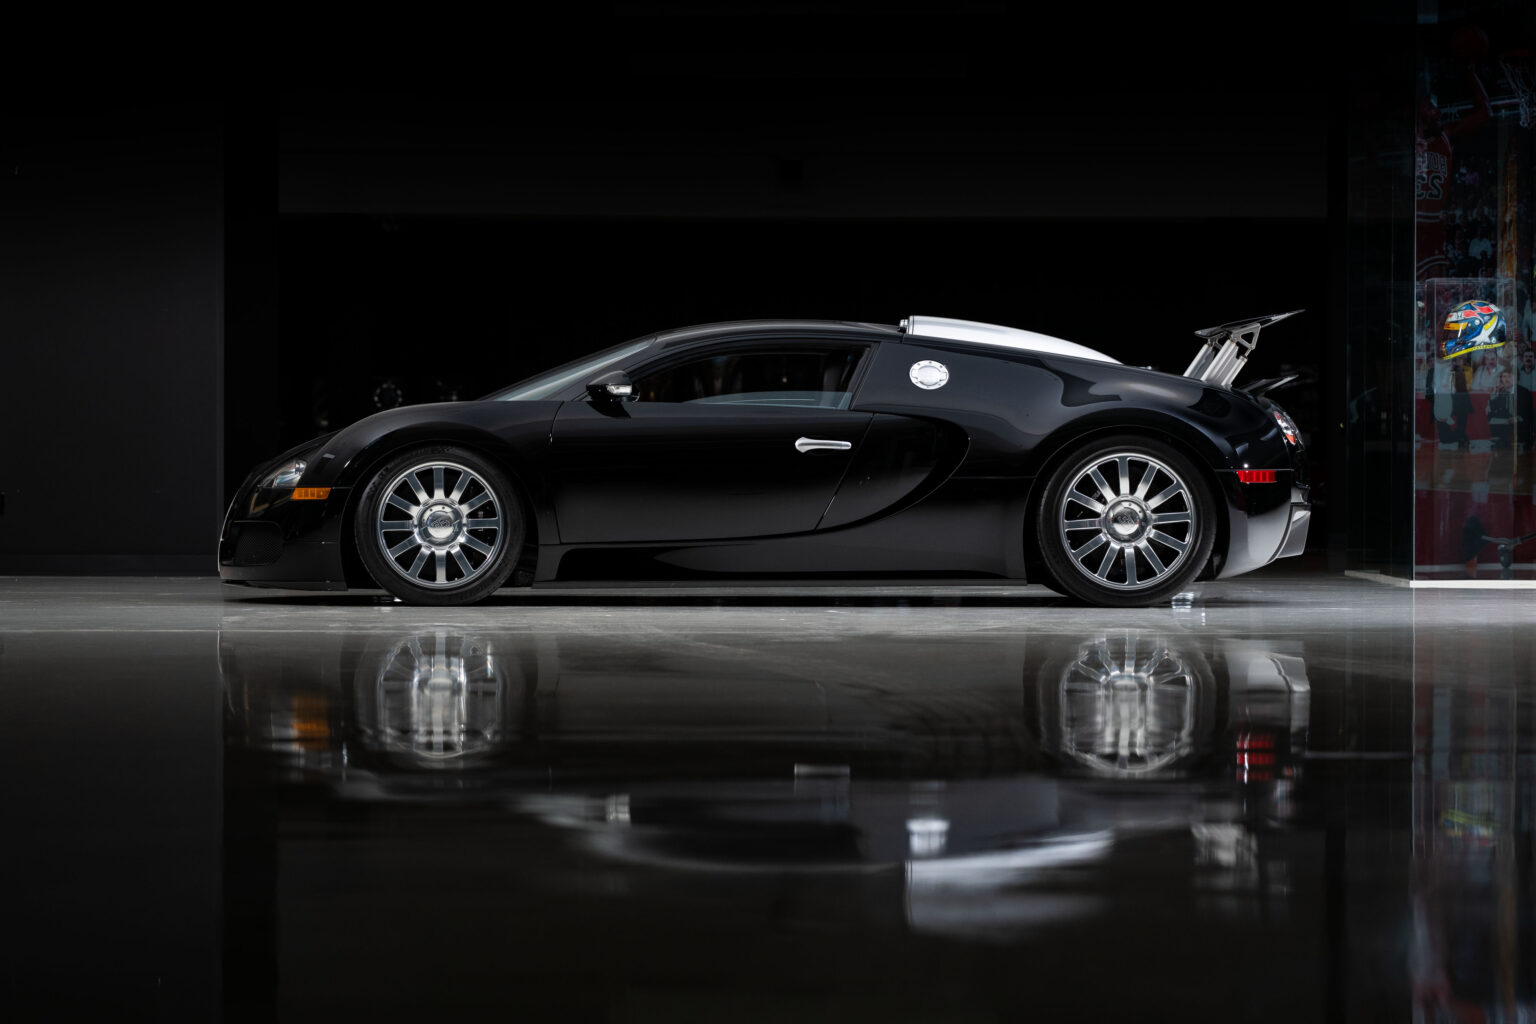 Simon Cowell's former Bugatti Veyron, bought for £1 million, now on sale for £1.3 million. Rare single-color black, top speed over 250mph.